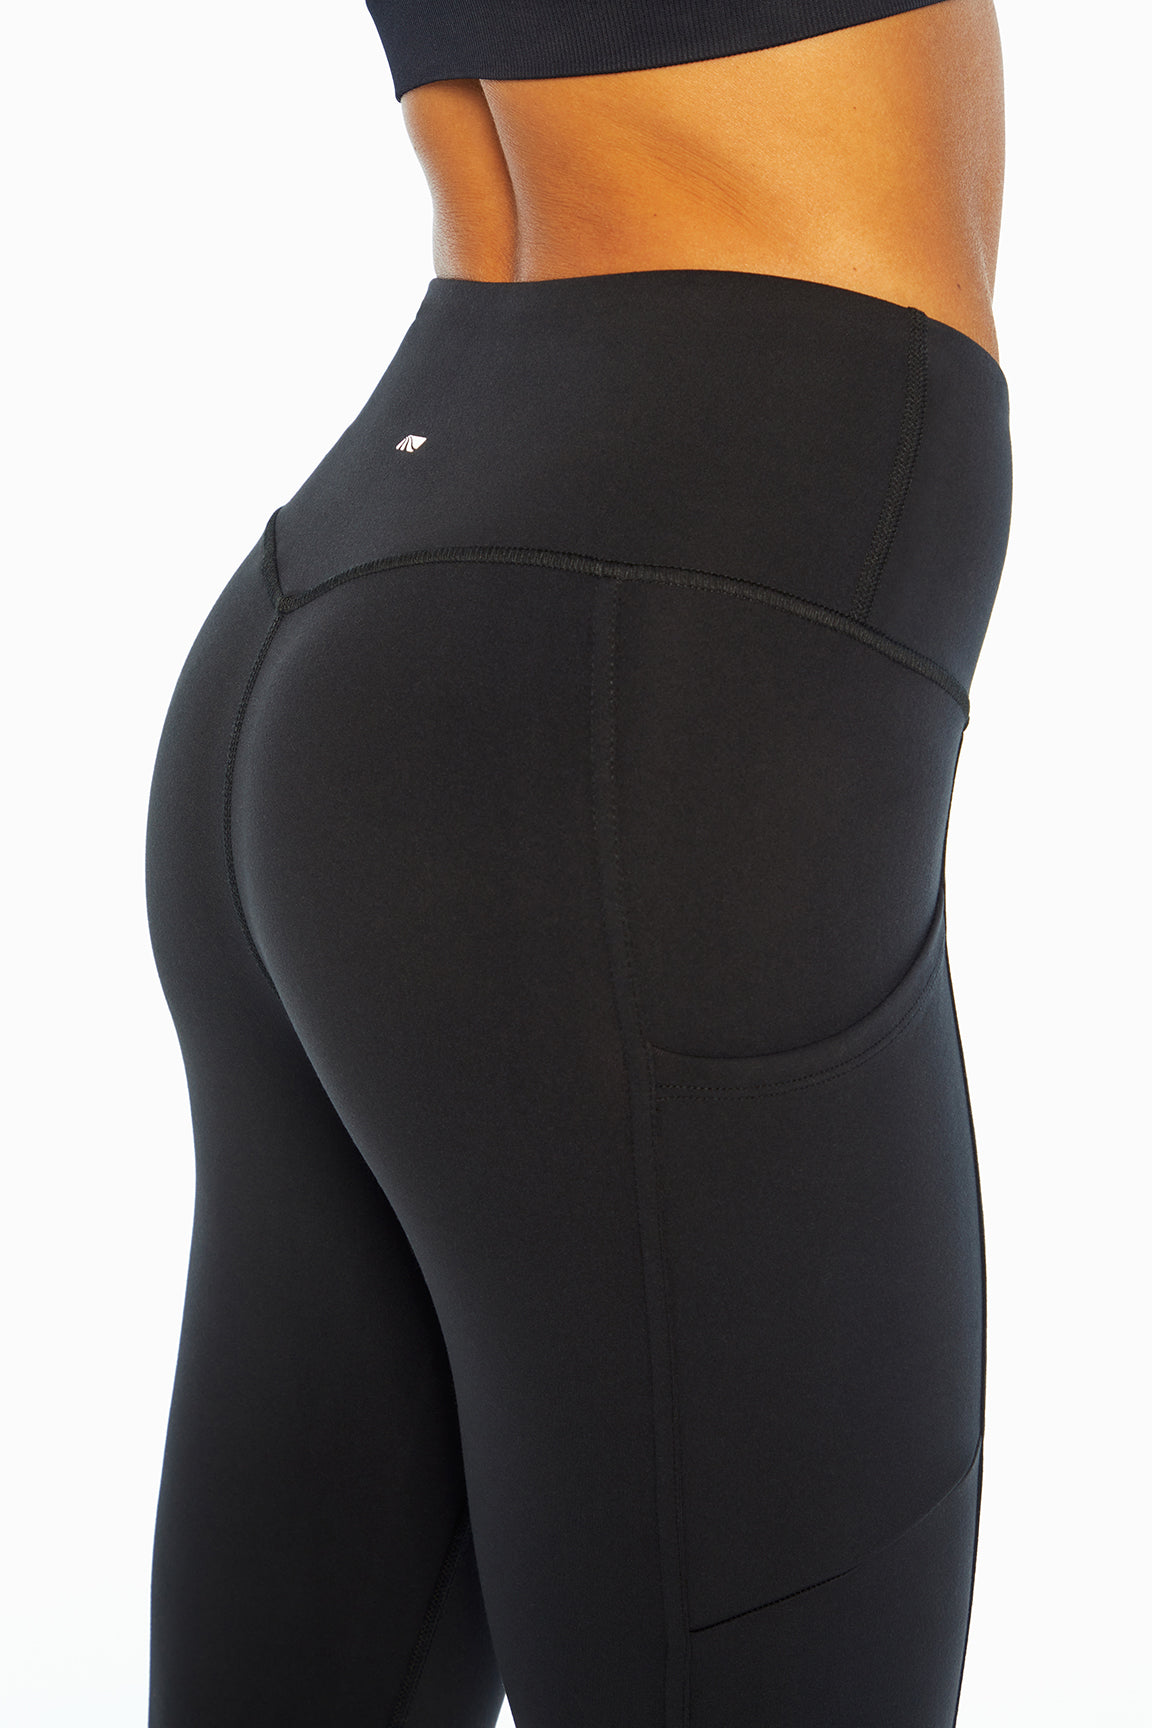 EVCR High Waisted Blocked Lined Leggings with Pockets for Women